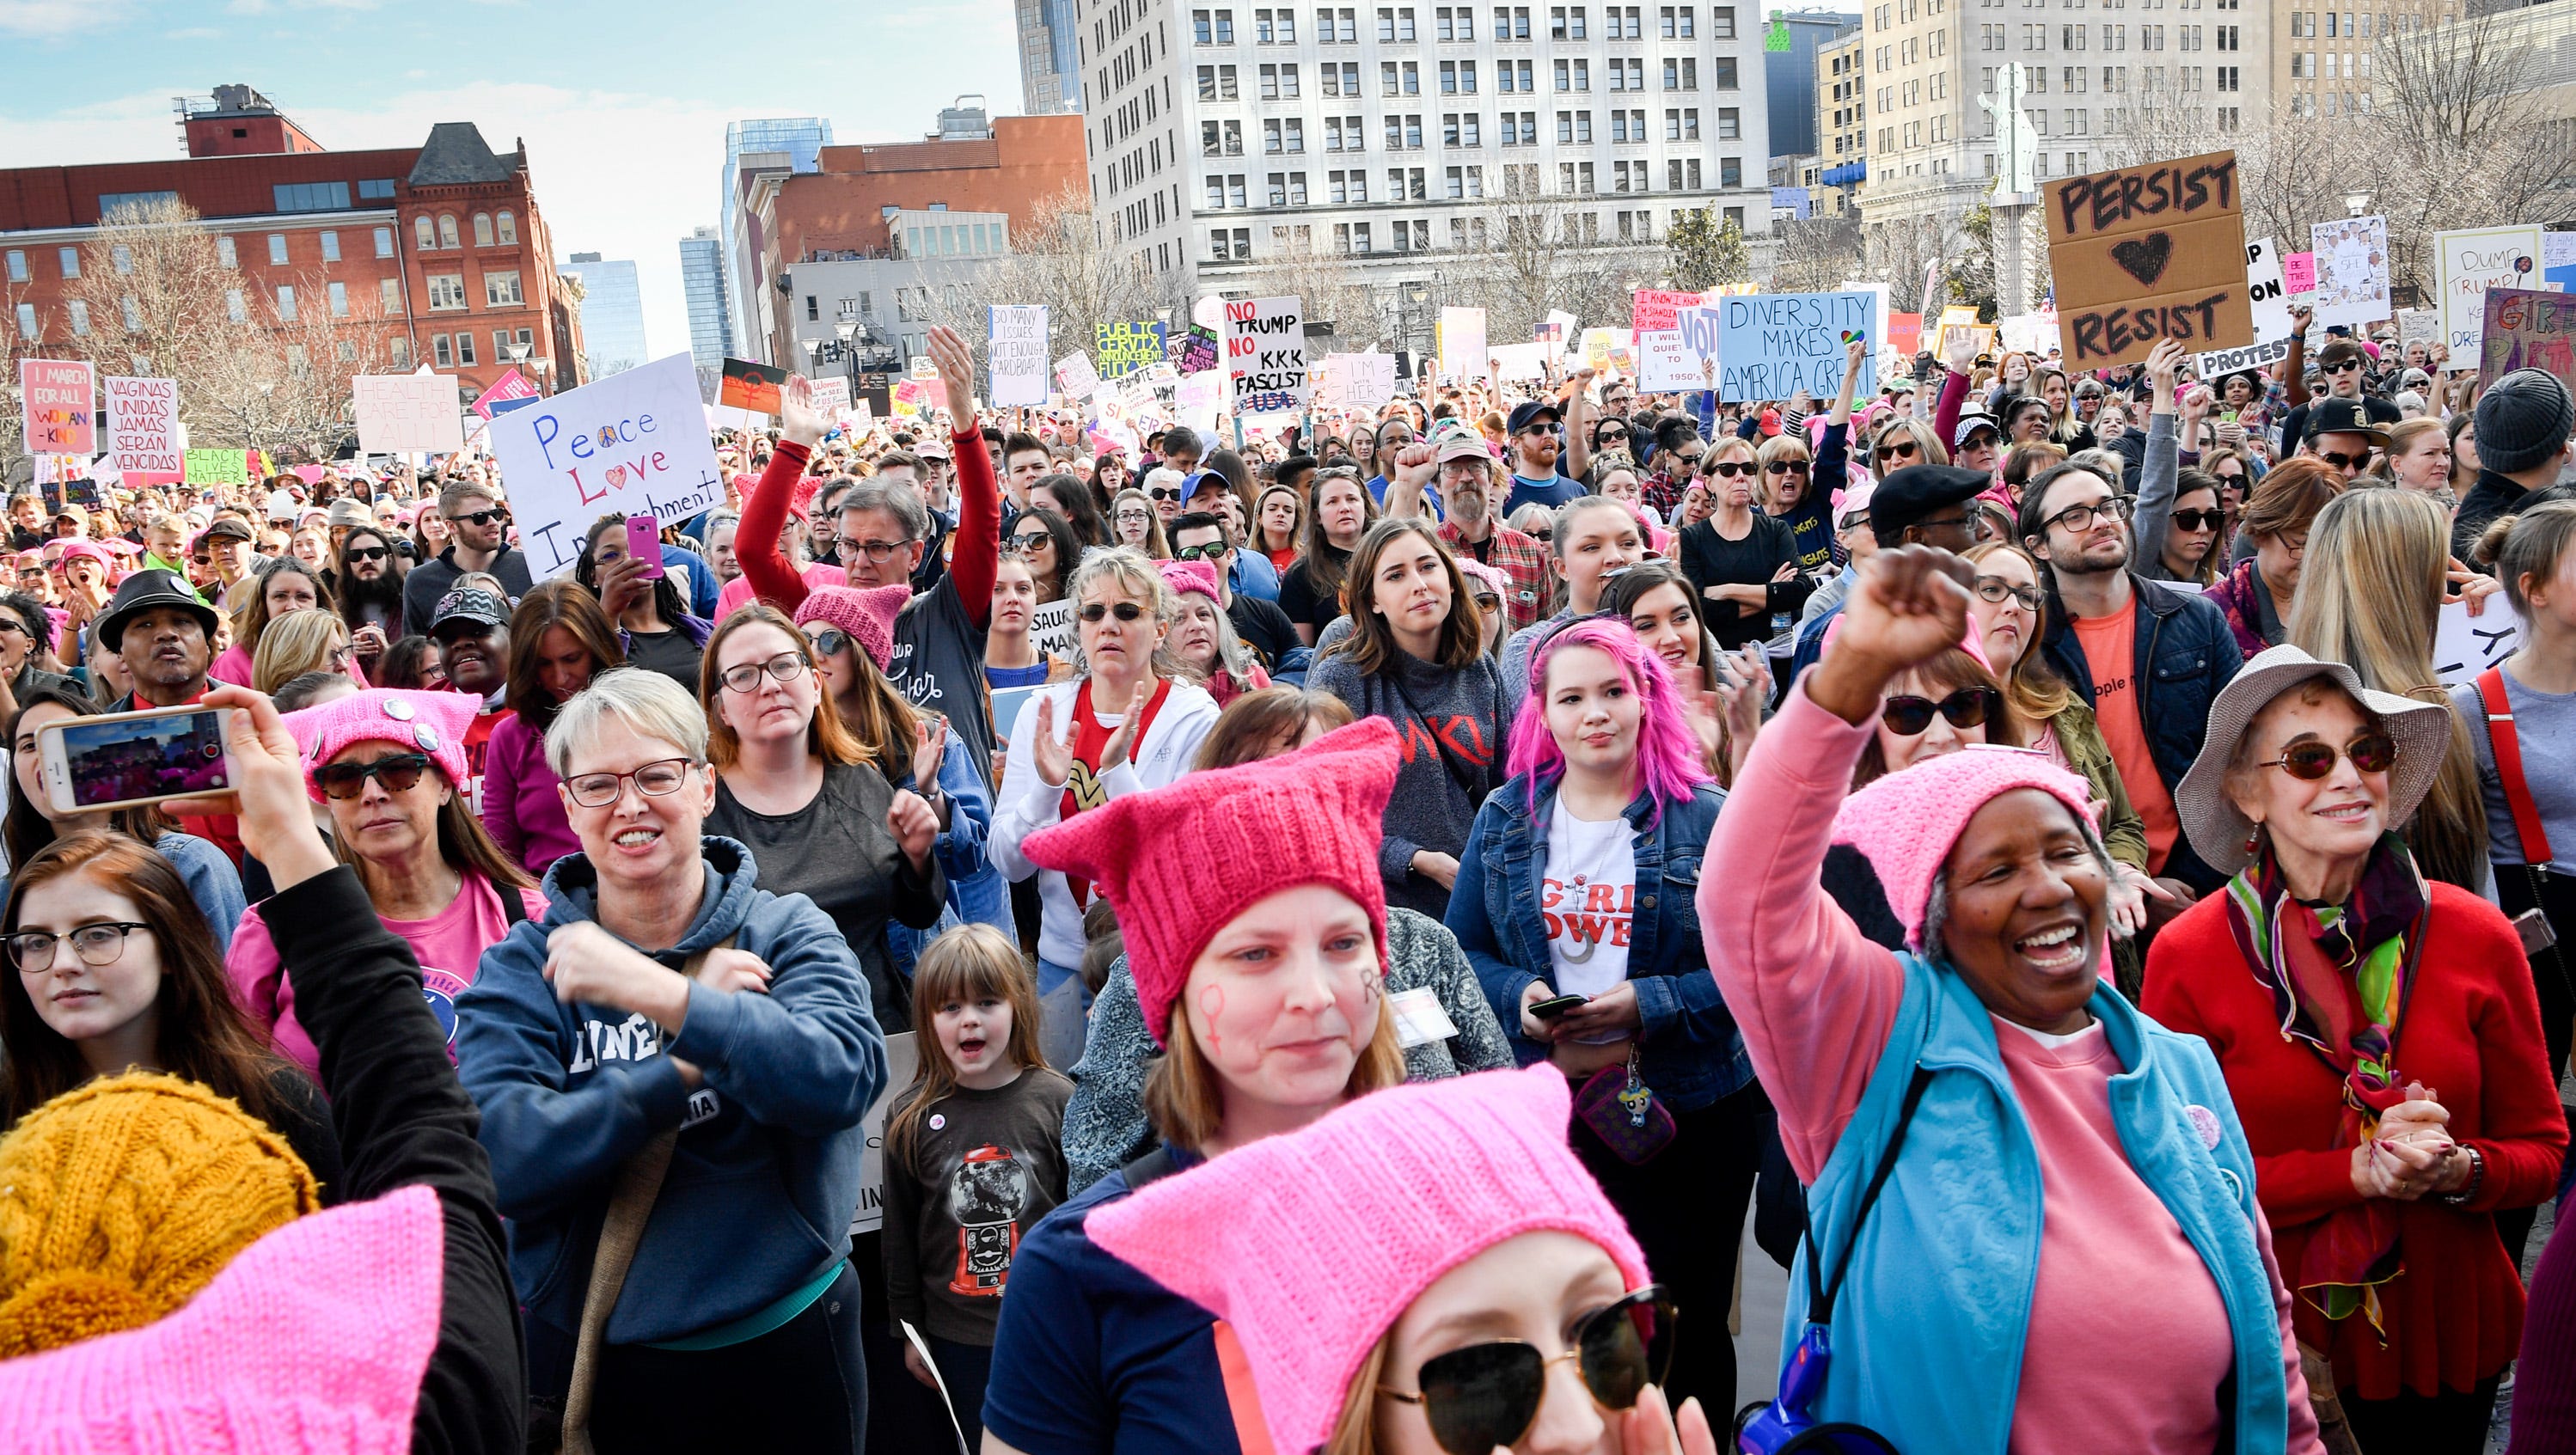 Nashville Women’s March 15k rally against Trump, for women's rights